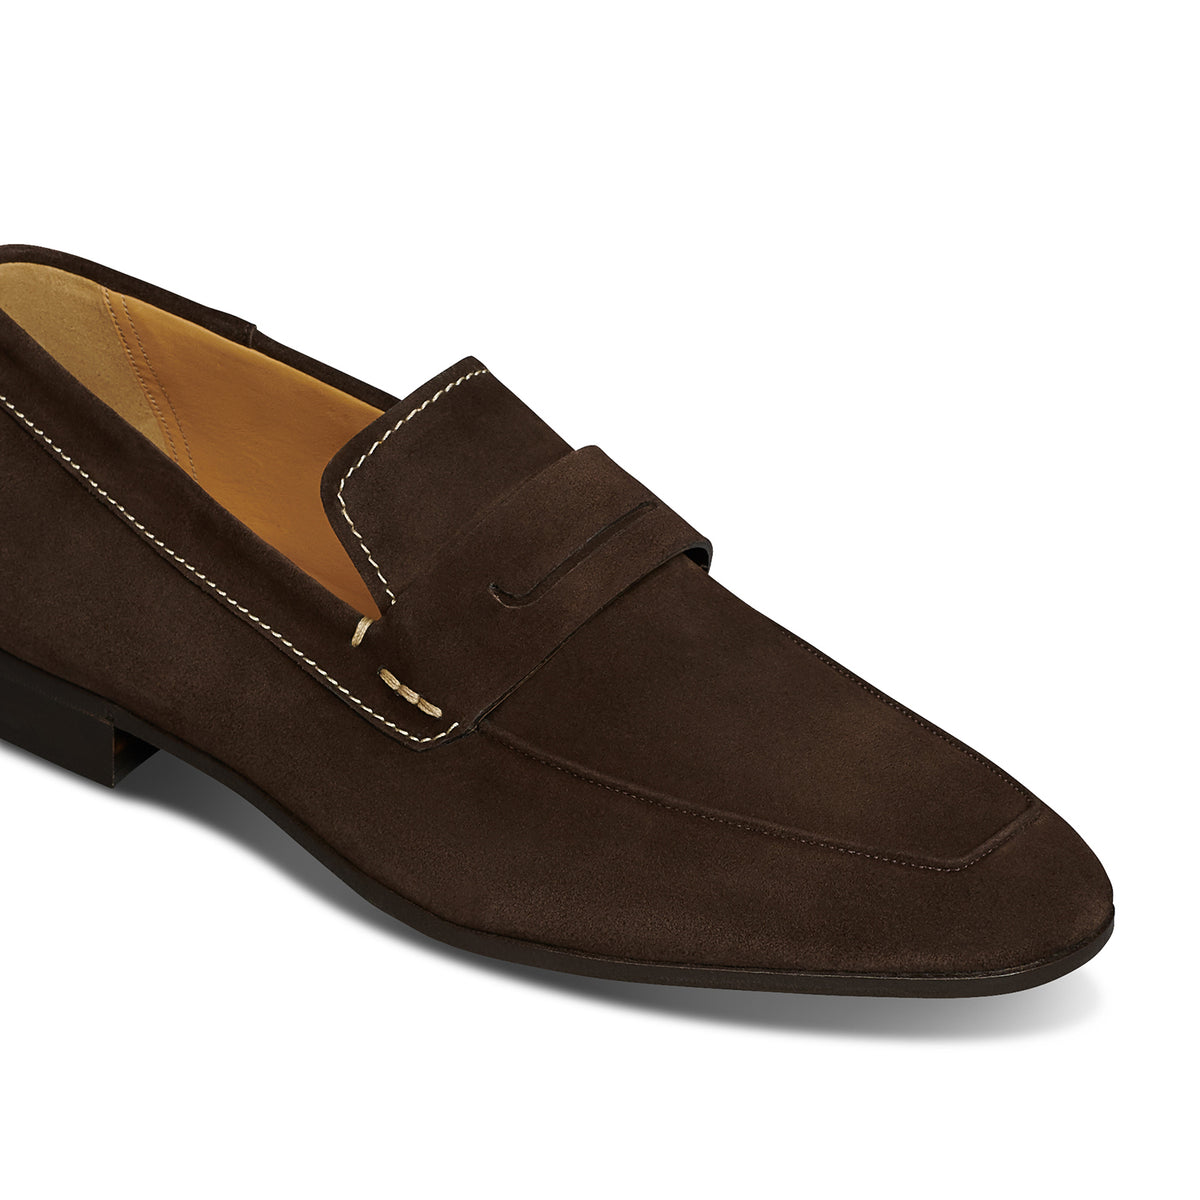 Lorenzo Leather Loafer